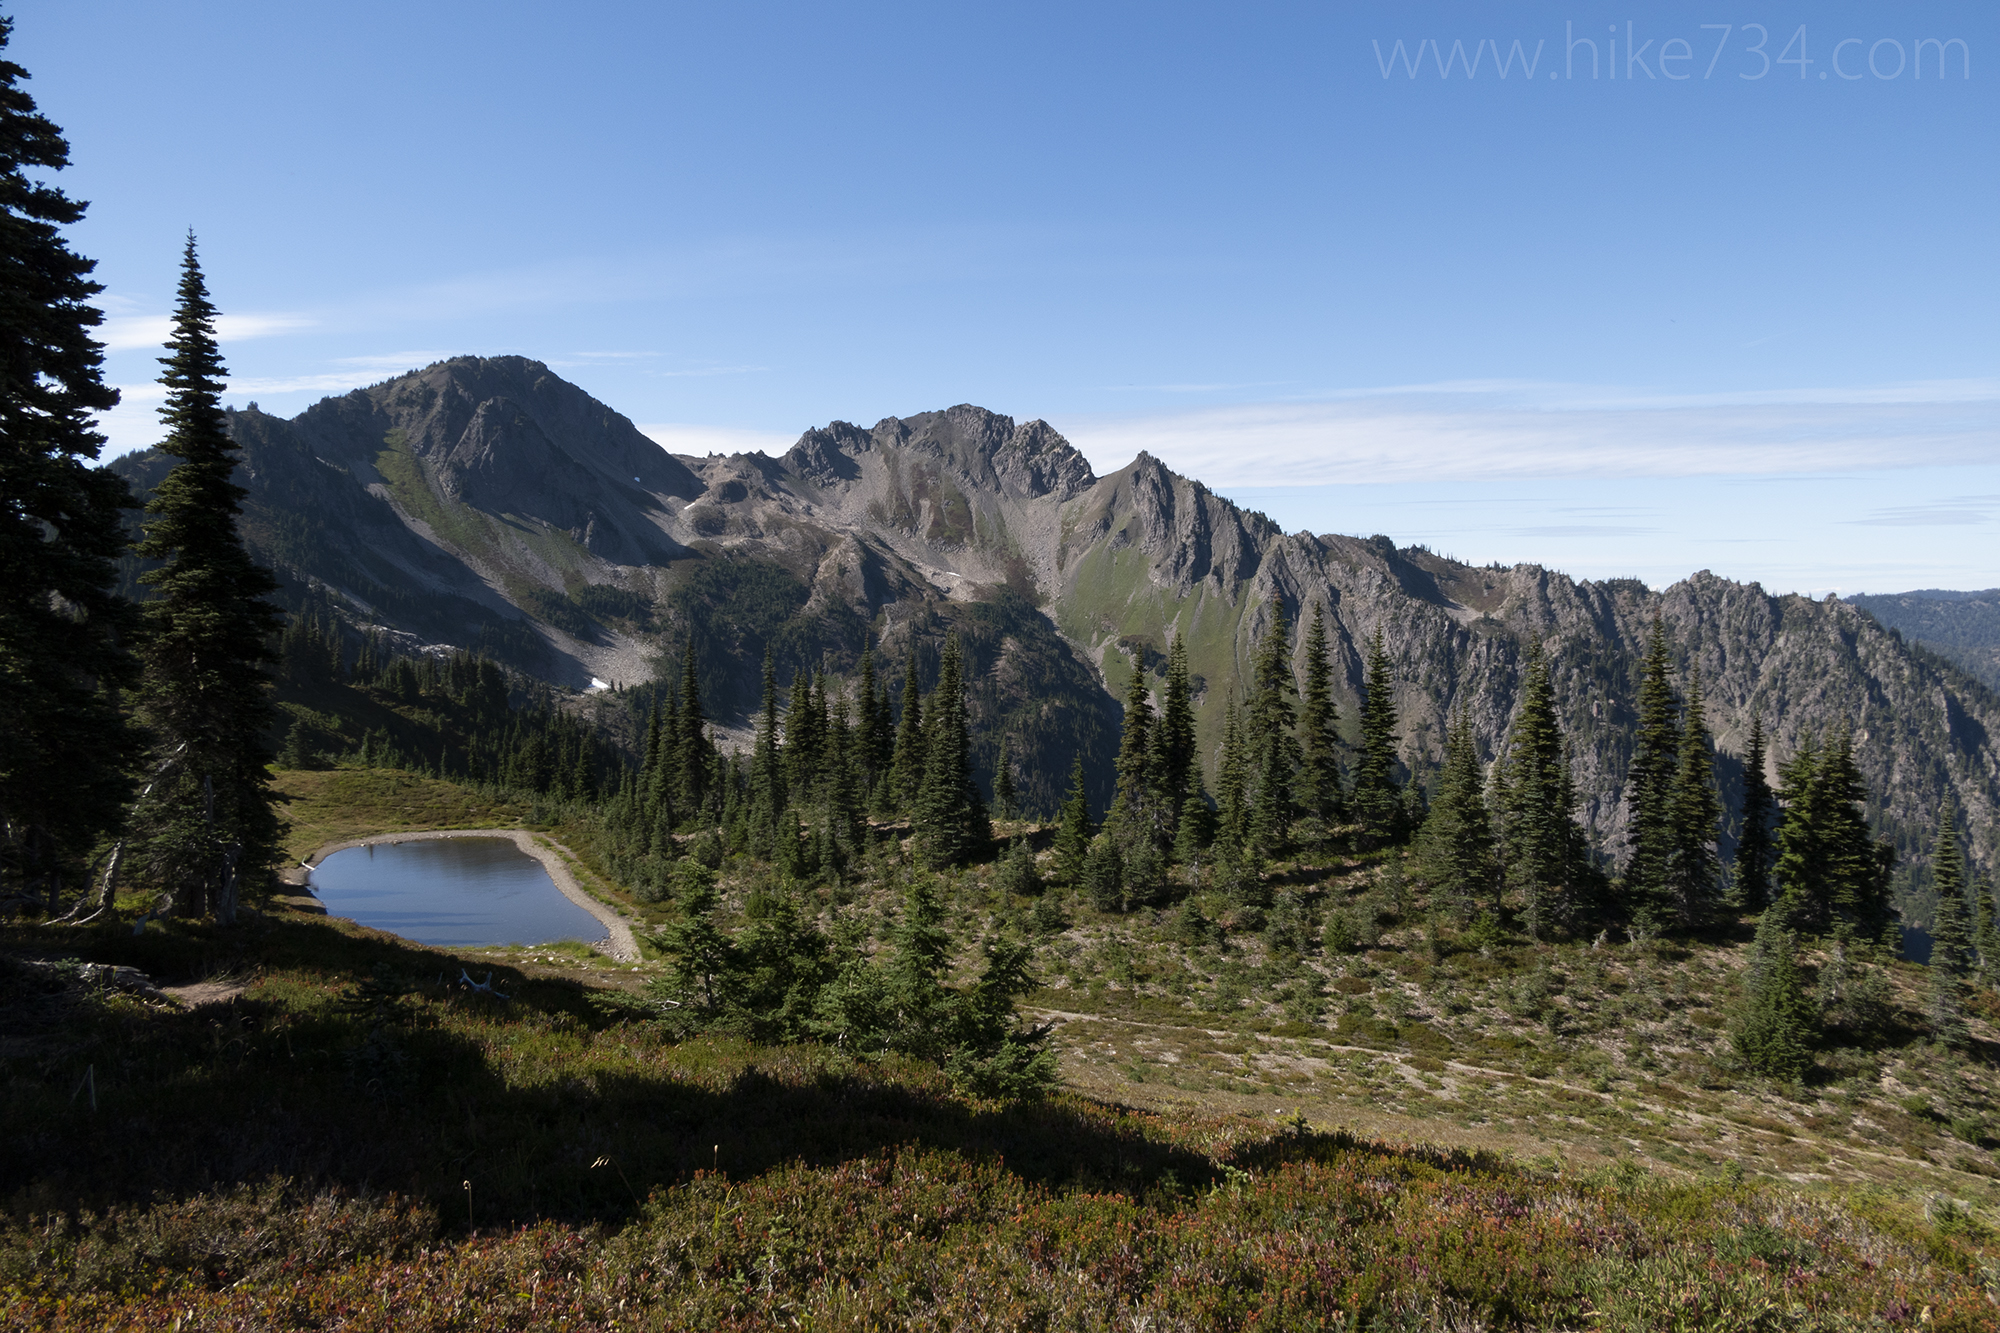 Appleton Pass and Oyster Lake